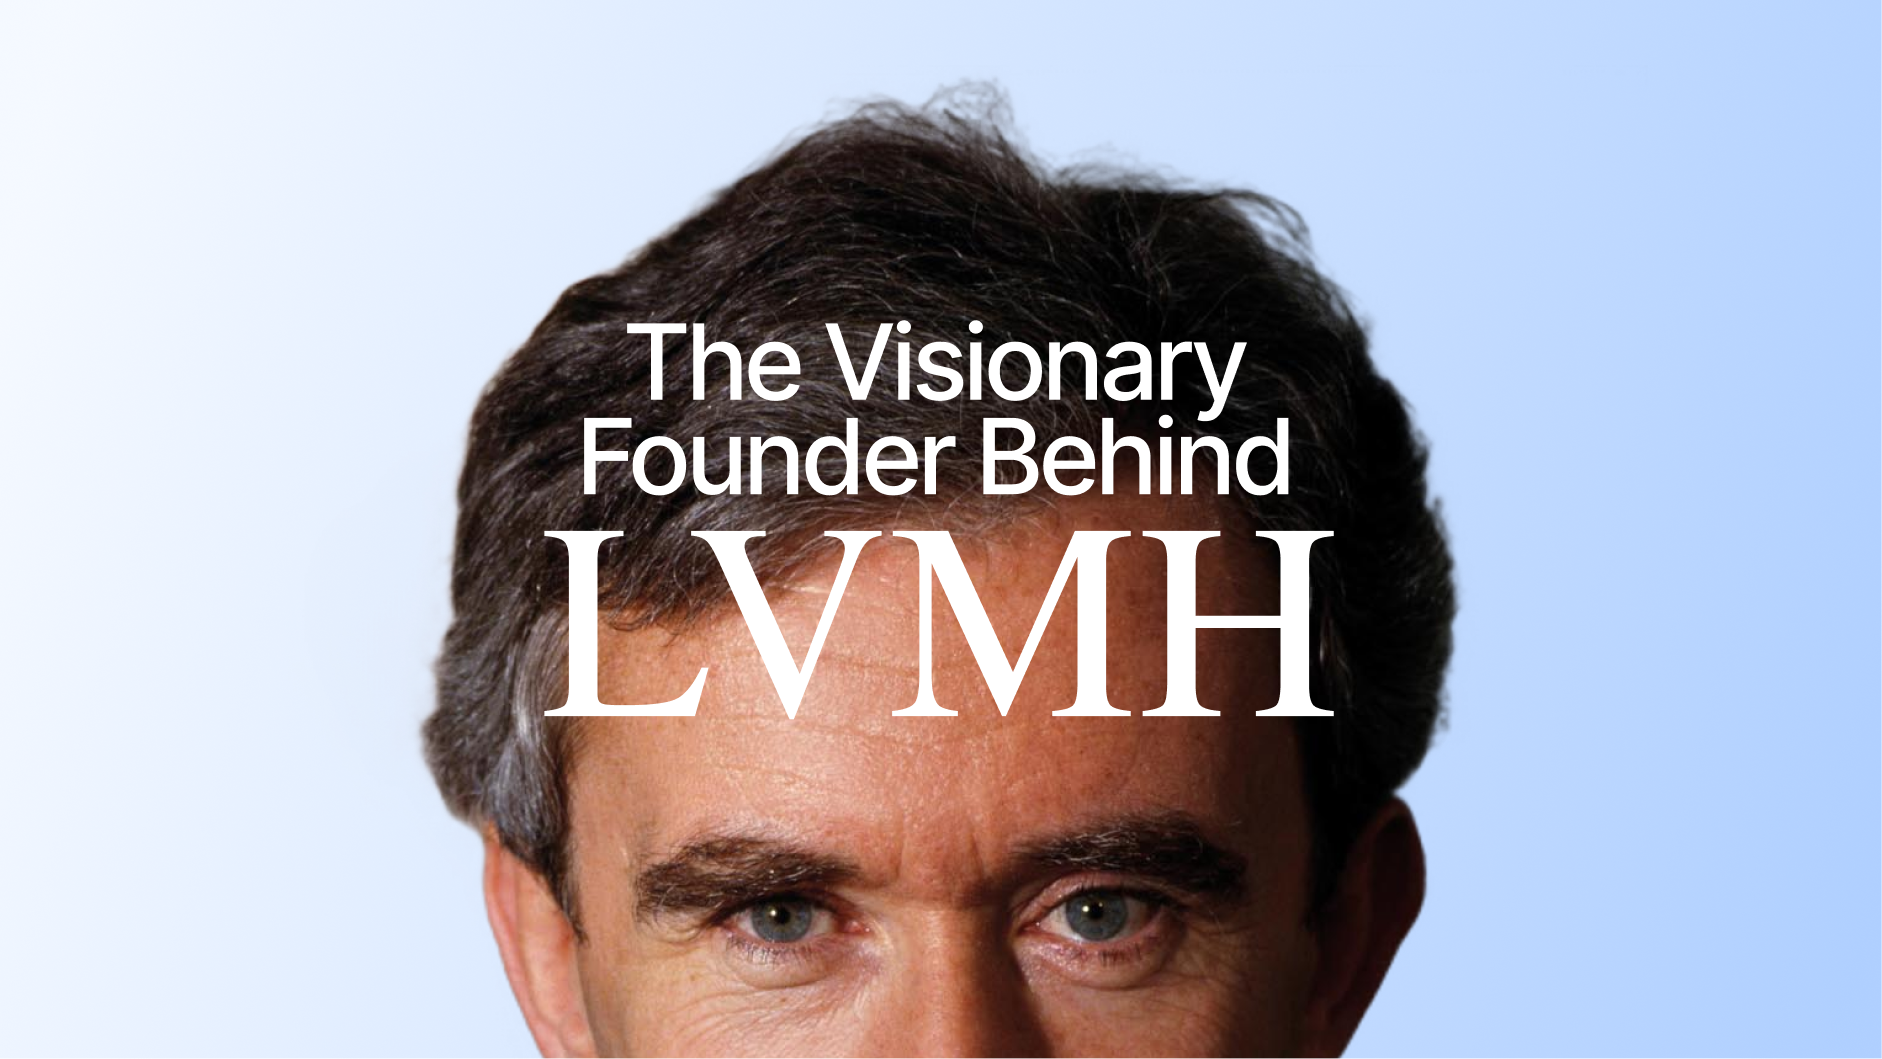 LVMH Moet Hennessy Louis Vuitton $LVMUY Q4 2022 Earnings Call